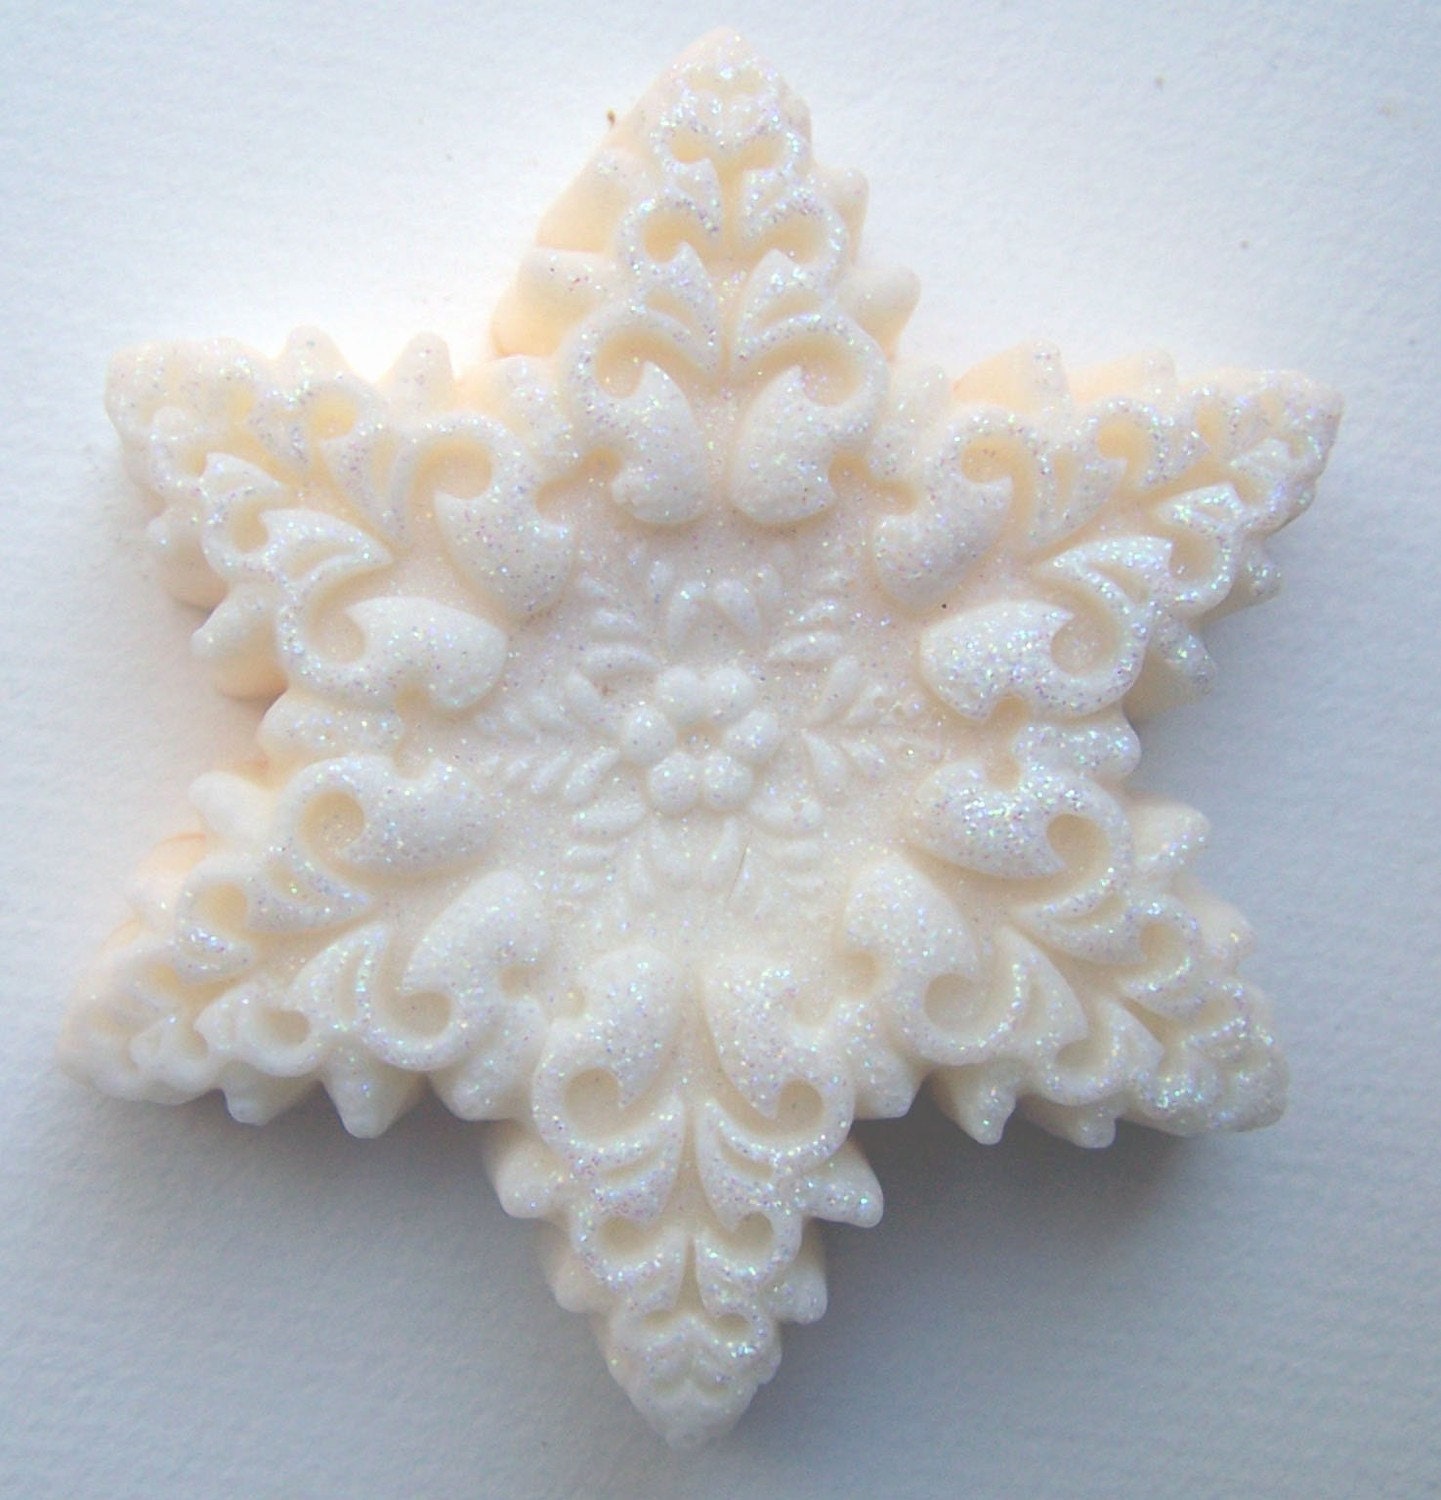 3 bars - Winter Holiday Snowflake Soap ...  Peppermint - Cinnamon - Vanilla twist scent .  Beautiful detail.  Priority shipping